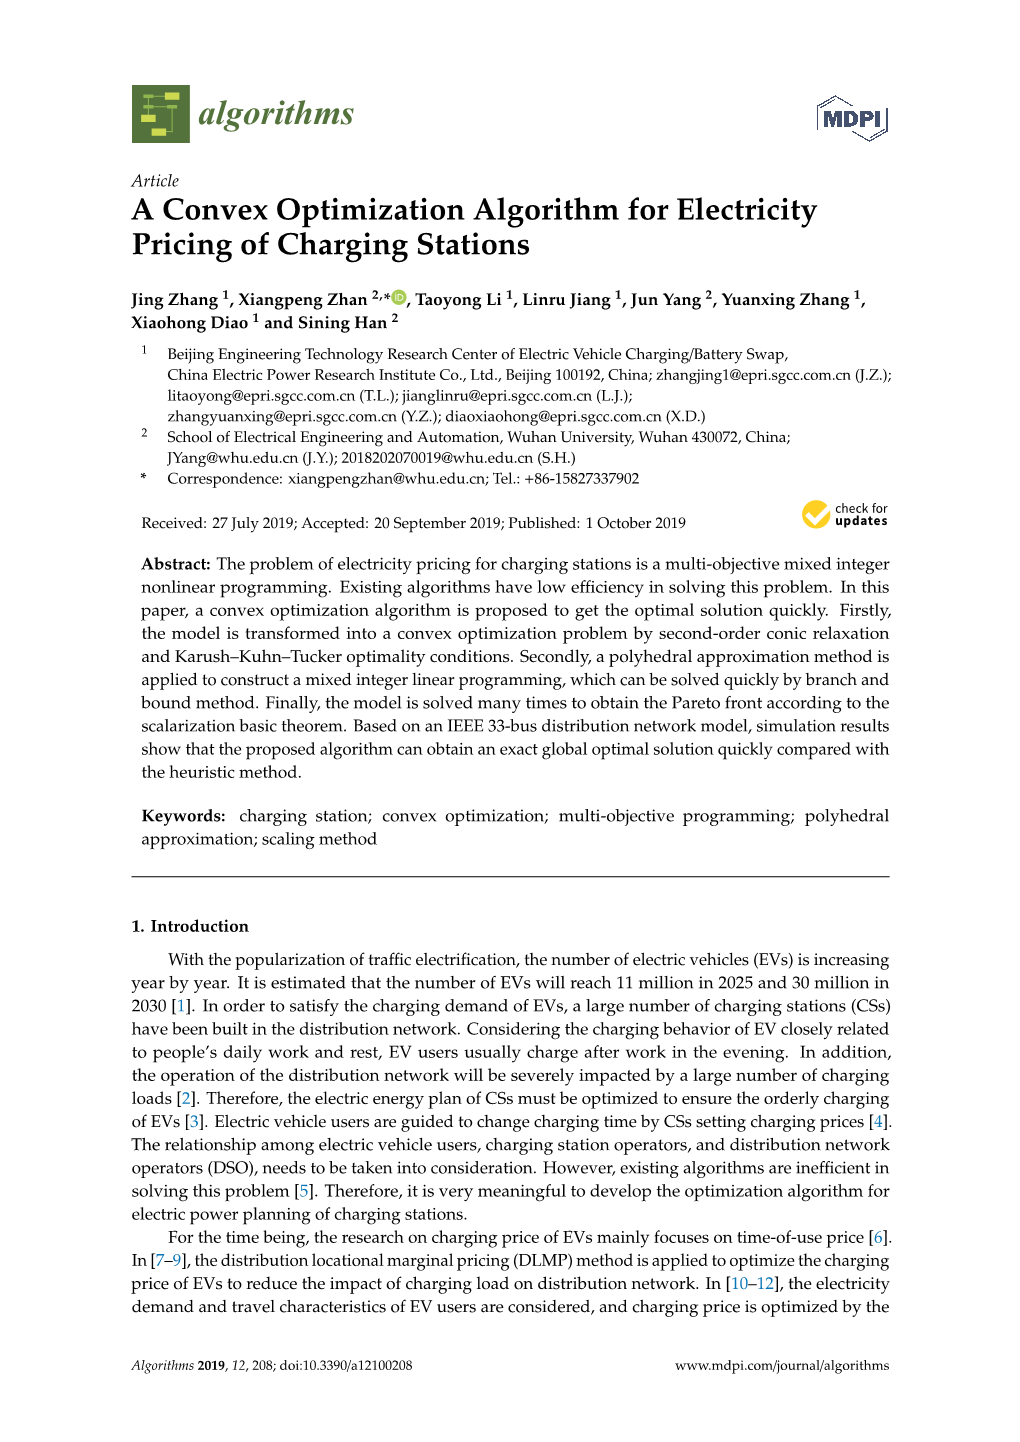 A Convex Optimization Algorithm for Electricity Pricing of Charging Stations